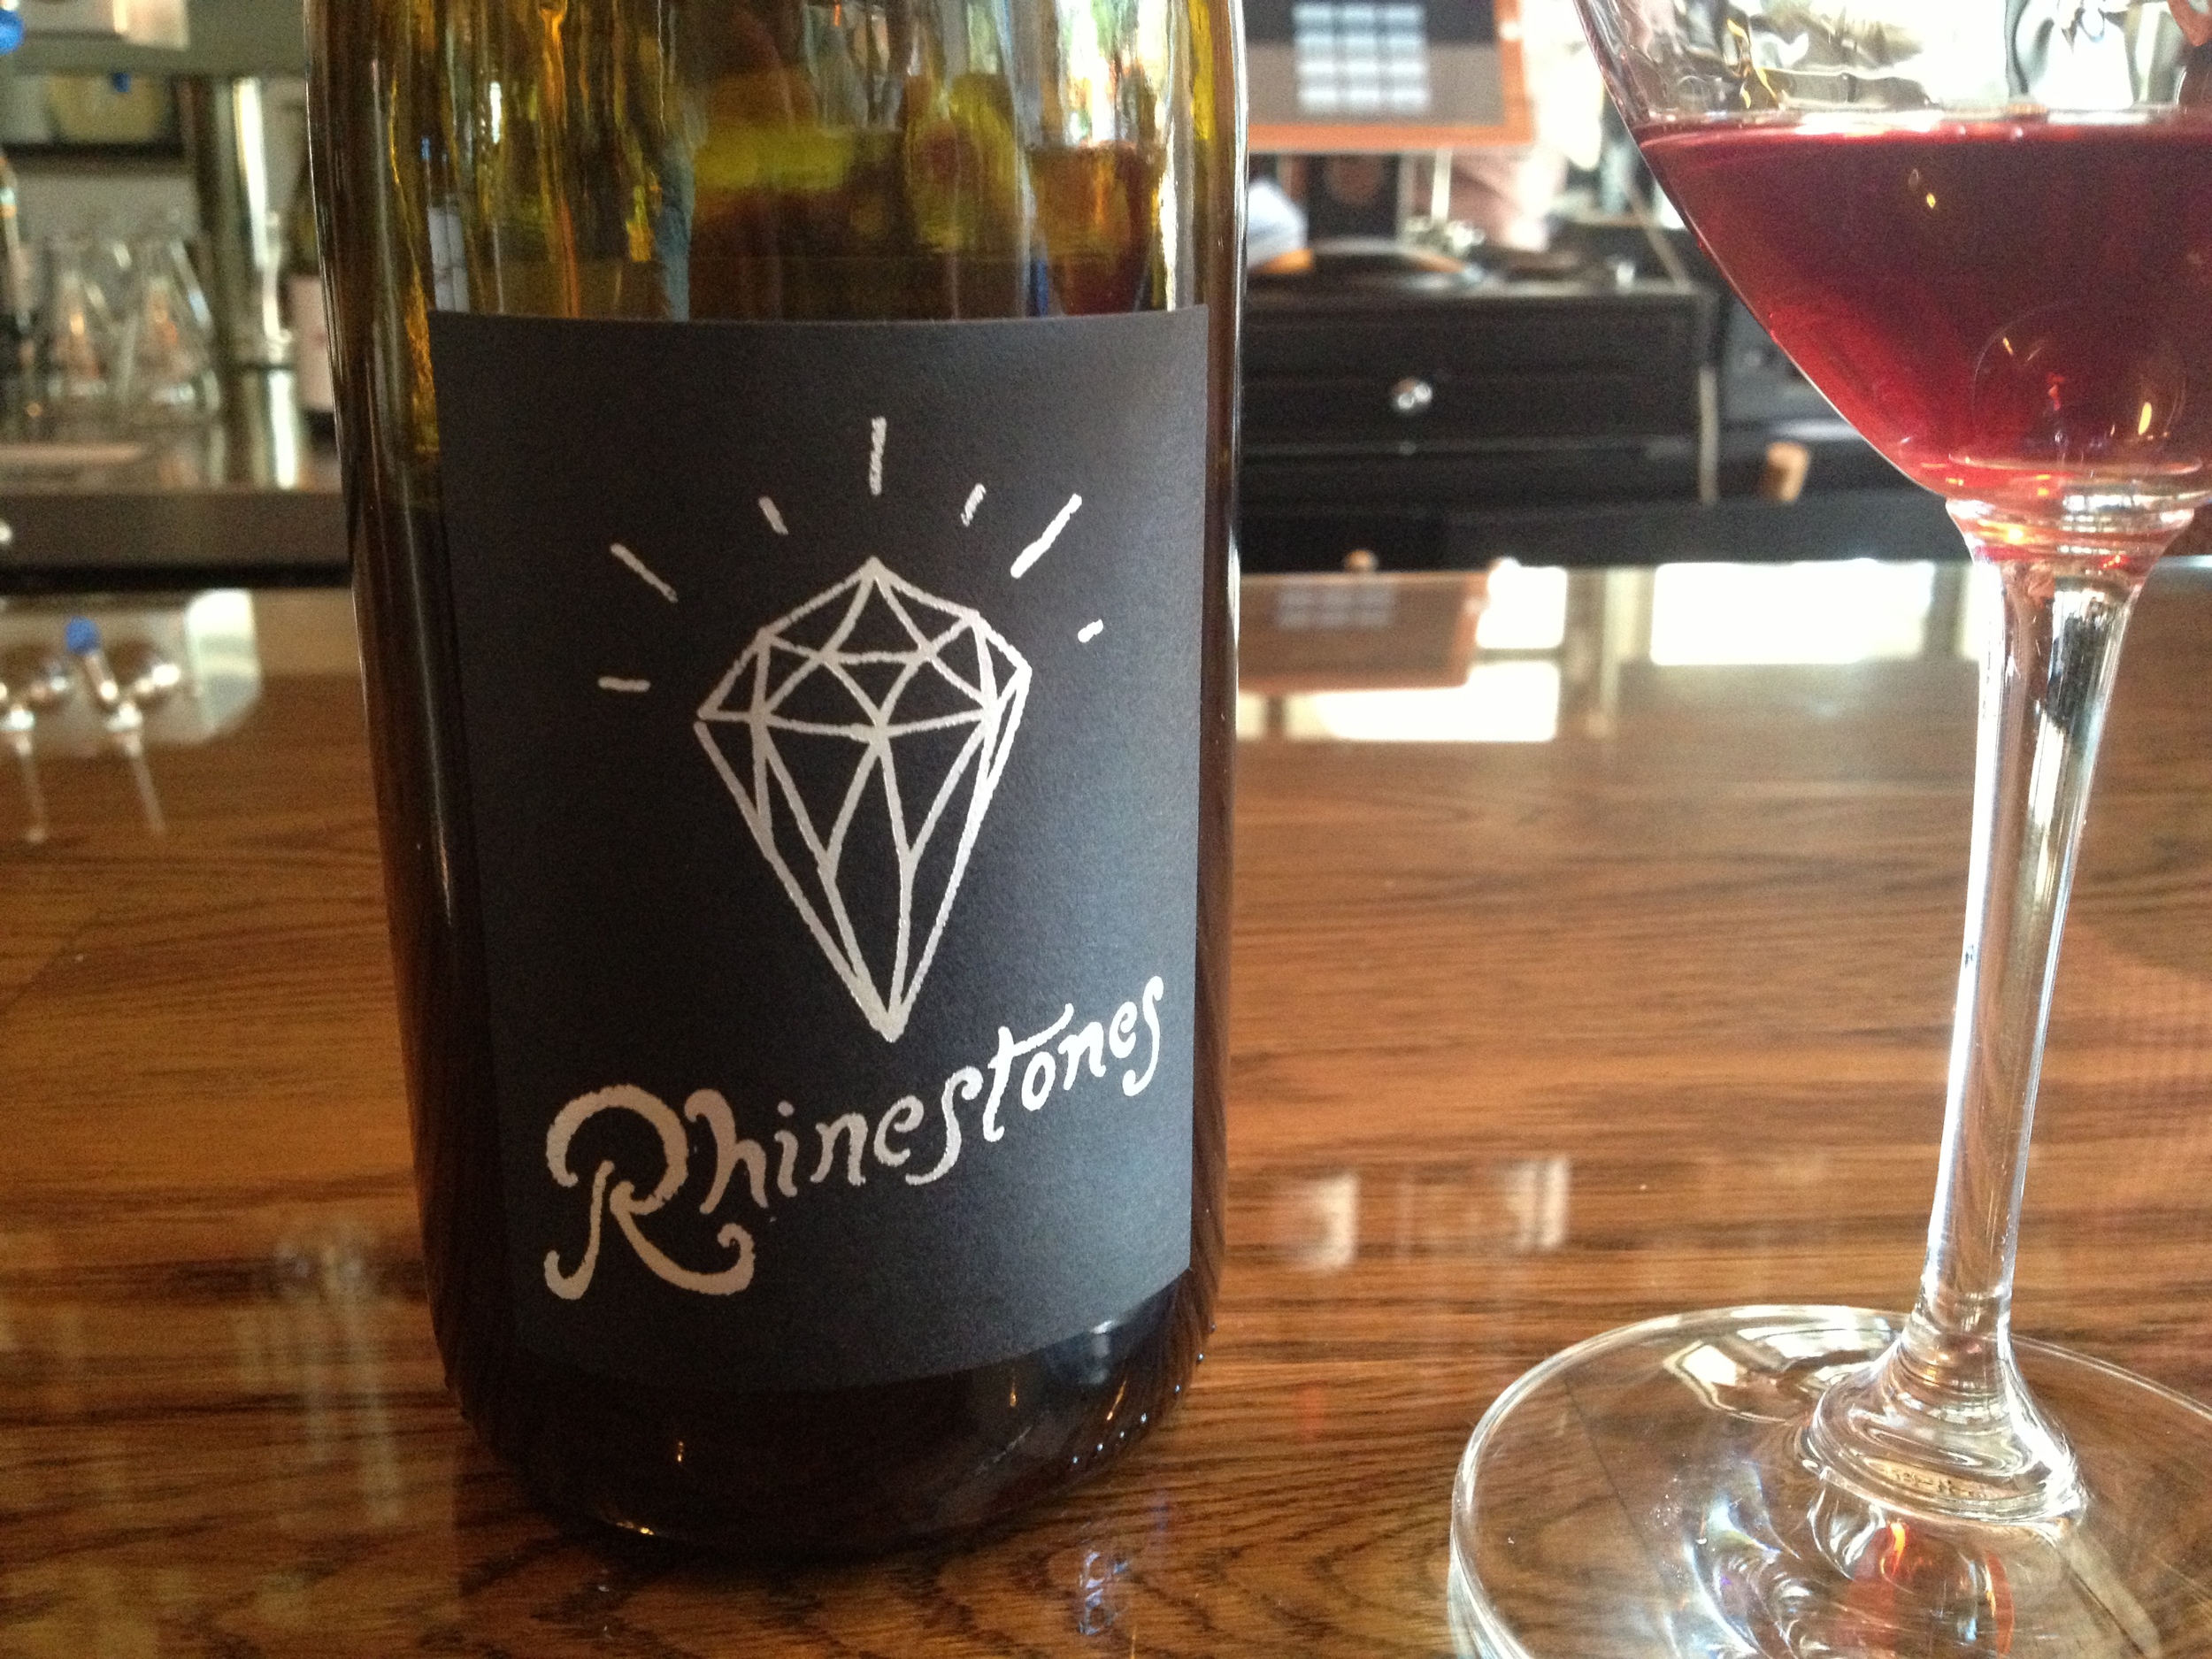  The Rhinestone Gamay/Pinot Noir from Bow and Arrow.   